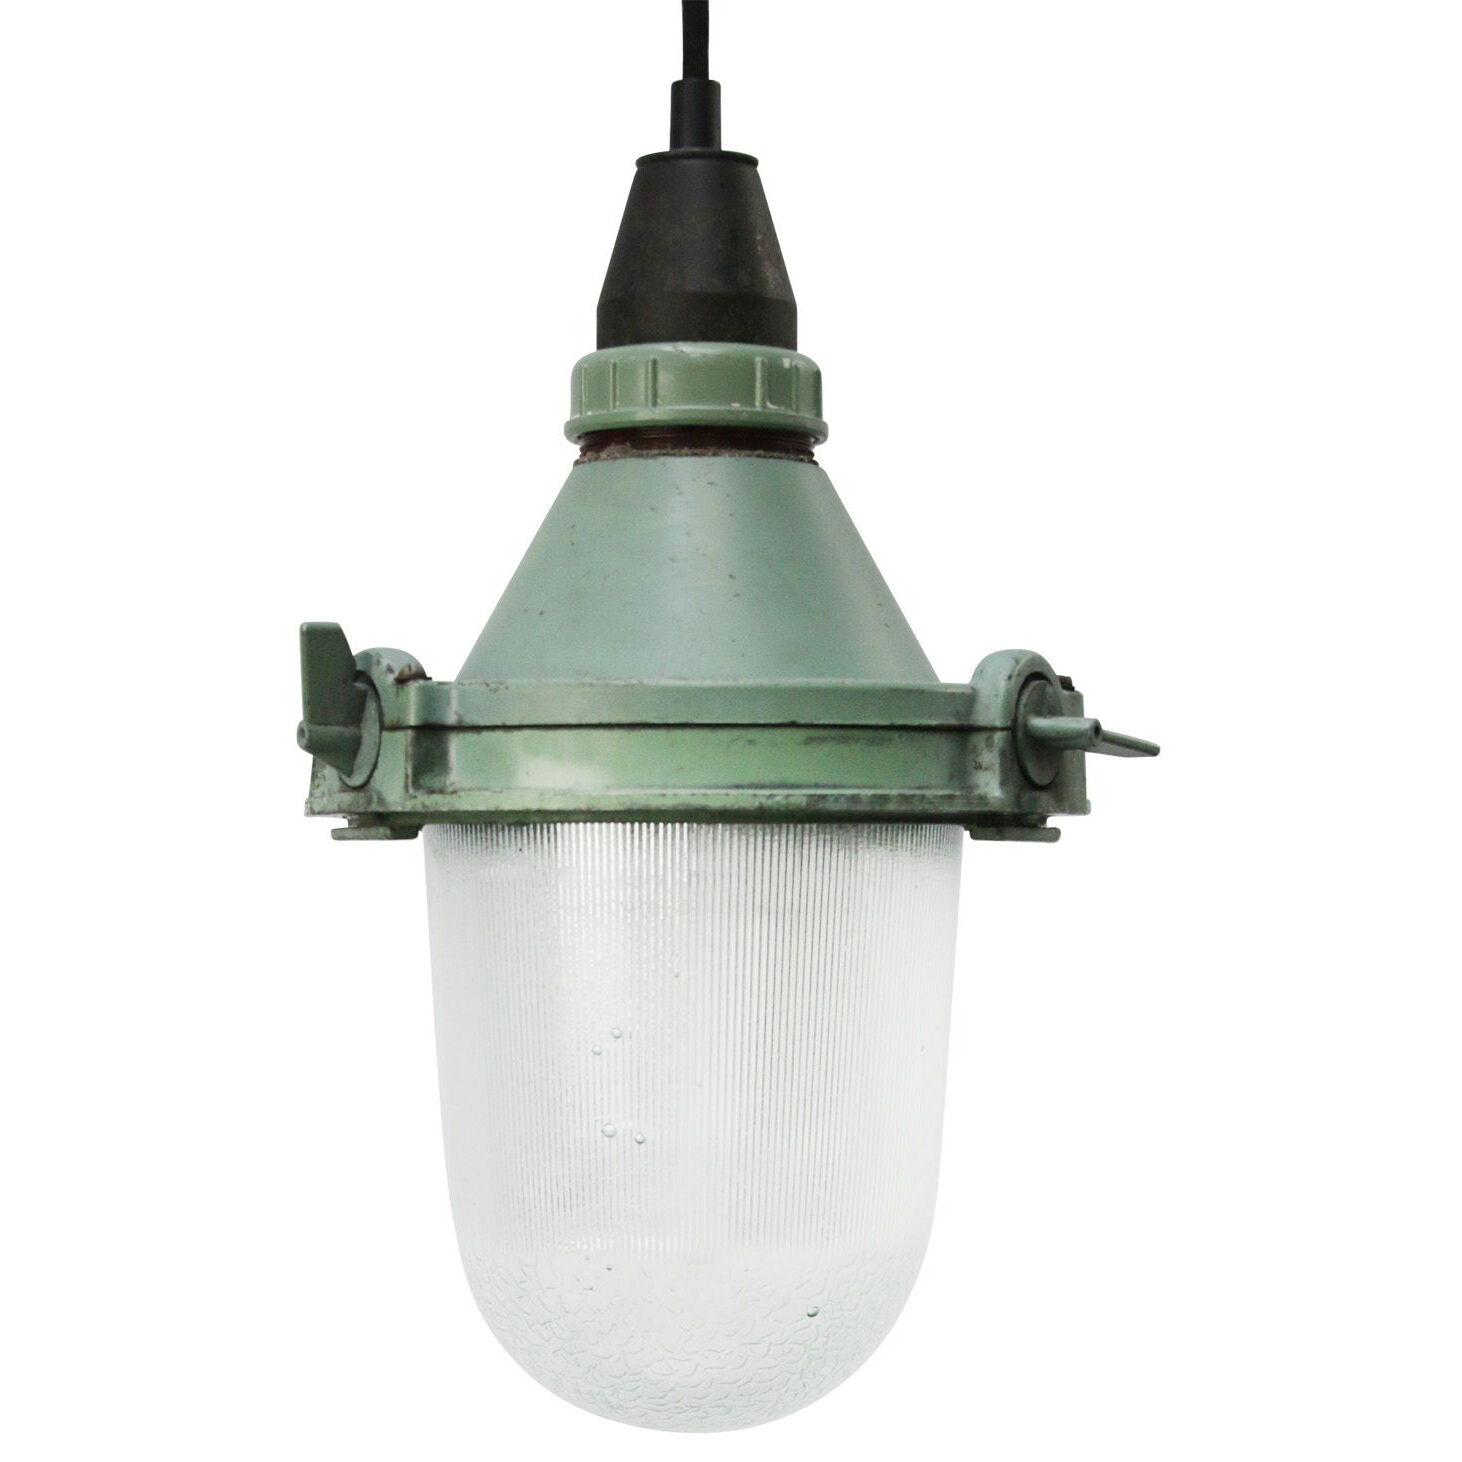 Green Vintage Industrial Striped Clear Glass Pendant Light